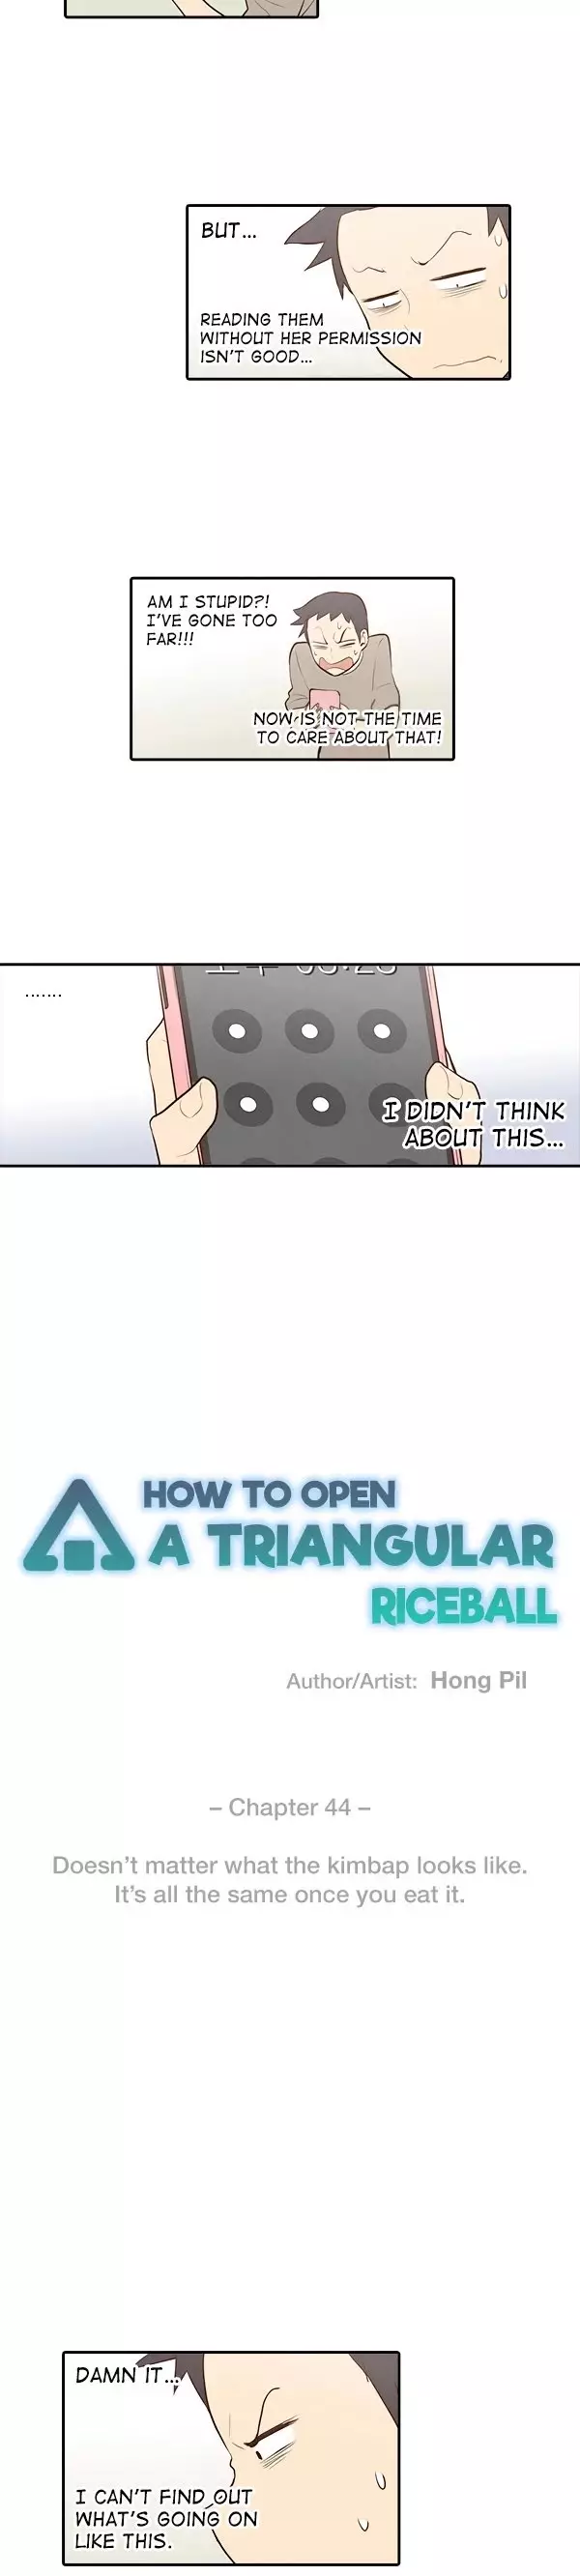 How To Open A Triangular Riceball - 44 page 4